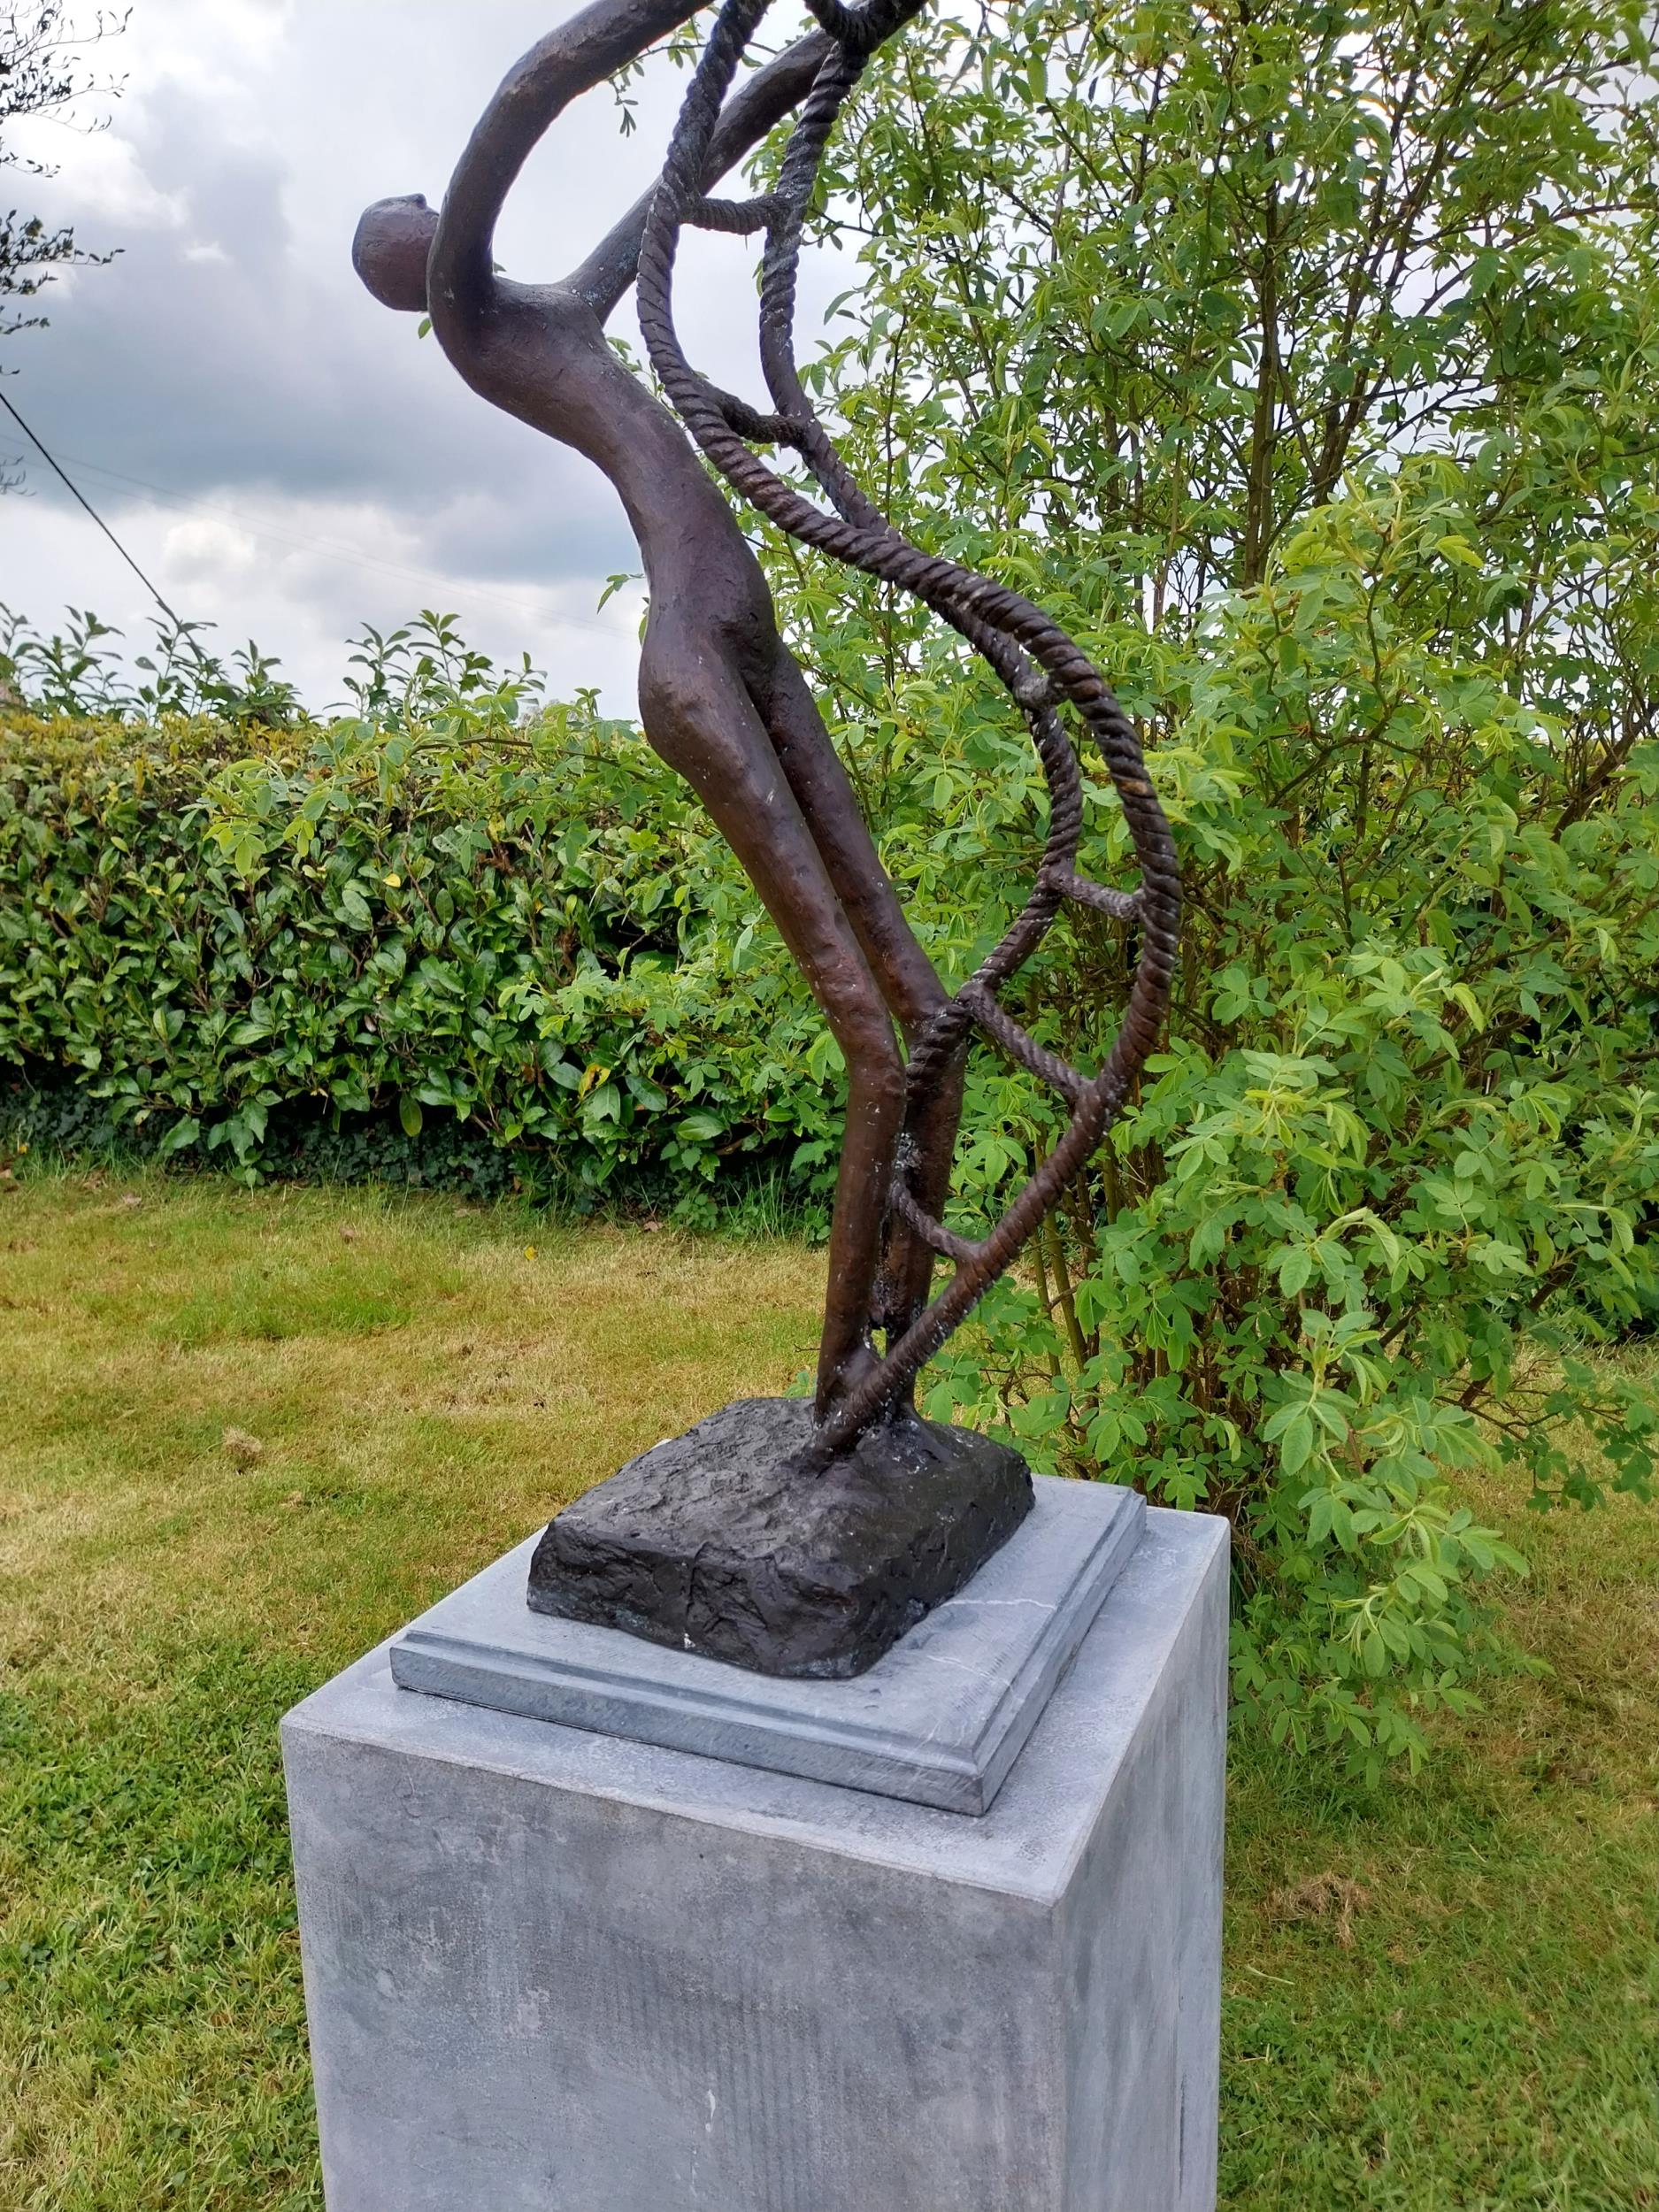 Exceptional quality contemporary bronze sculpture 'The Rope Climbing Acrobats' raised on slate - Image 4 of 7